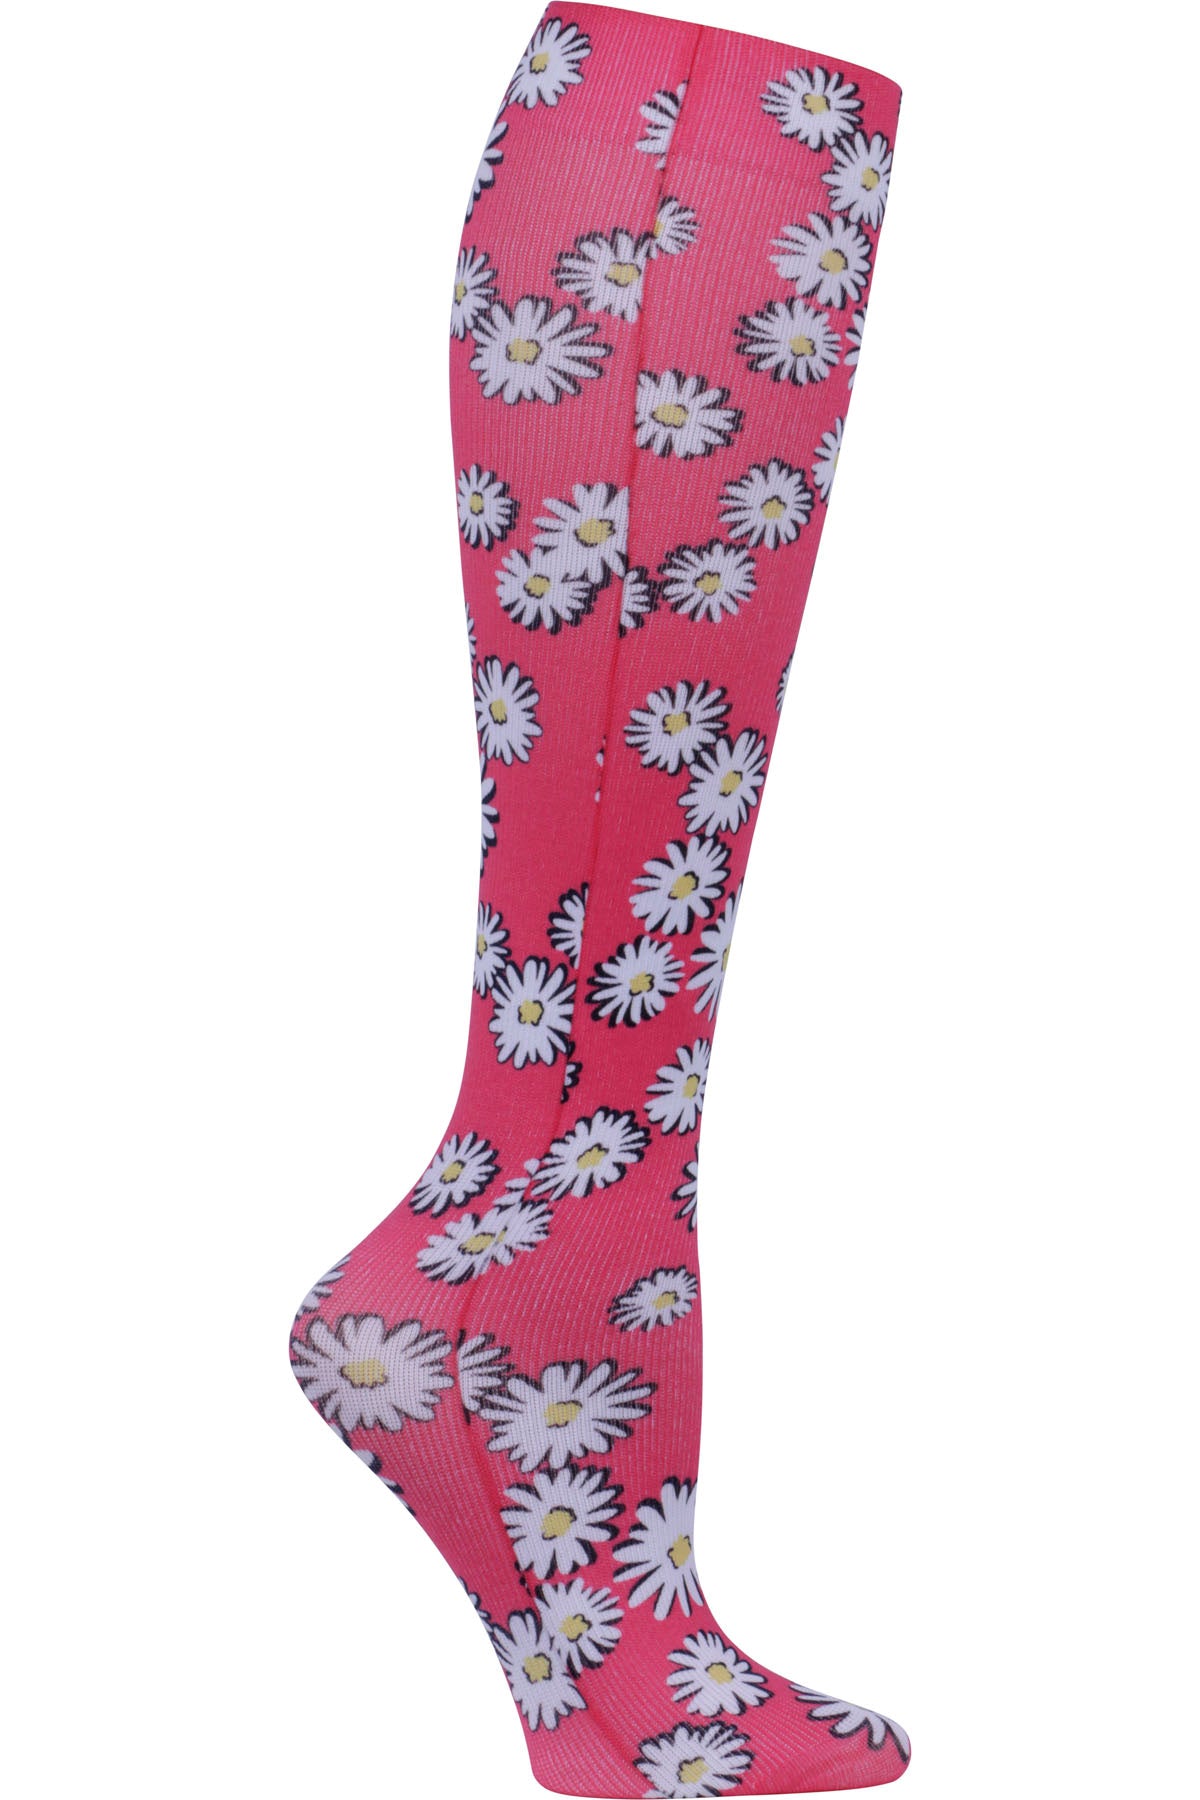 Celeste Stein Mild Compression Socks 8-15 mmHG Floating Daisies at Parker's Clothing and Shoes.